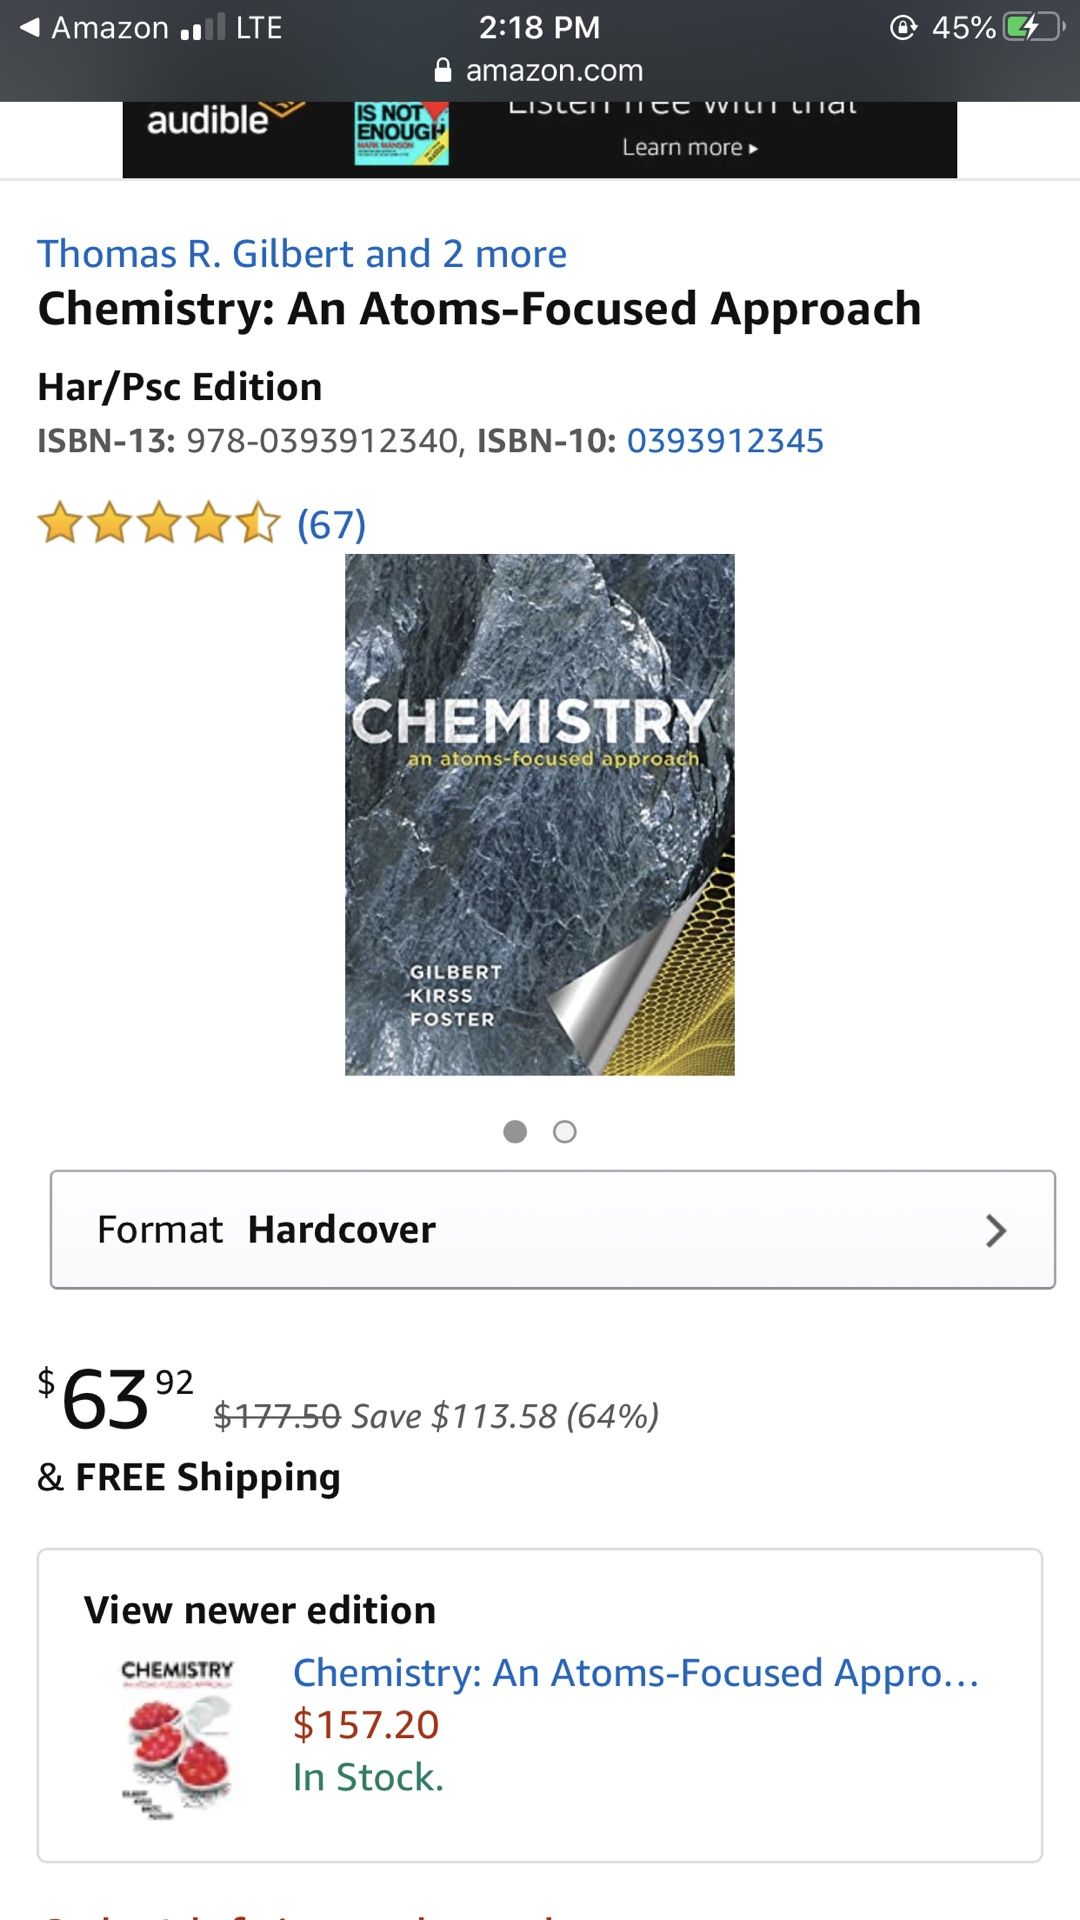 Chemistry an atoms-focused approach. GILBERT, KIRSS, FOSTER. Used, perfect condition 10/10.